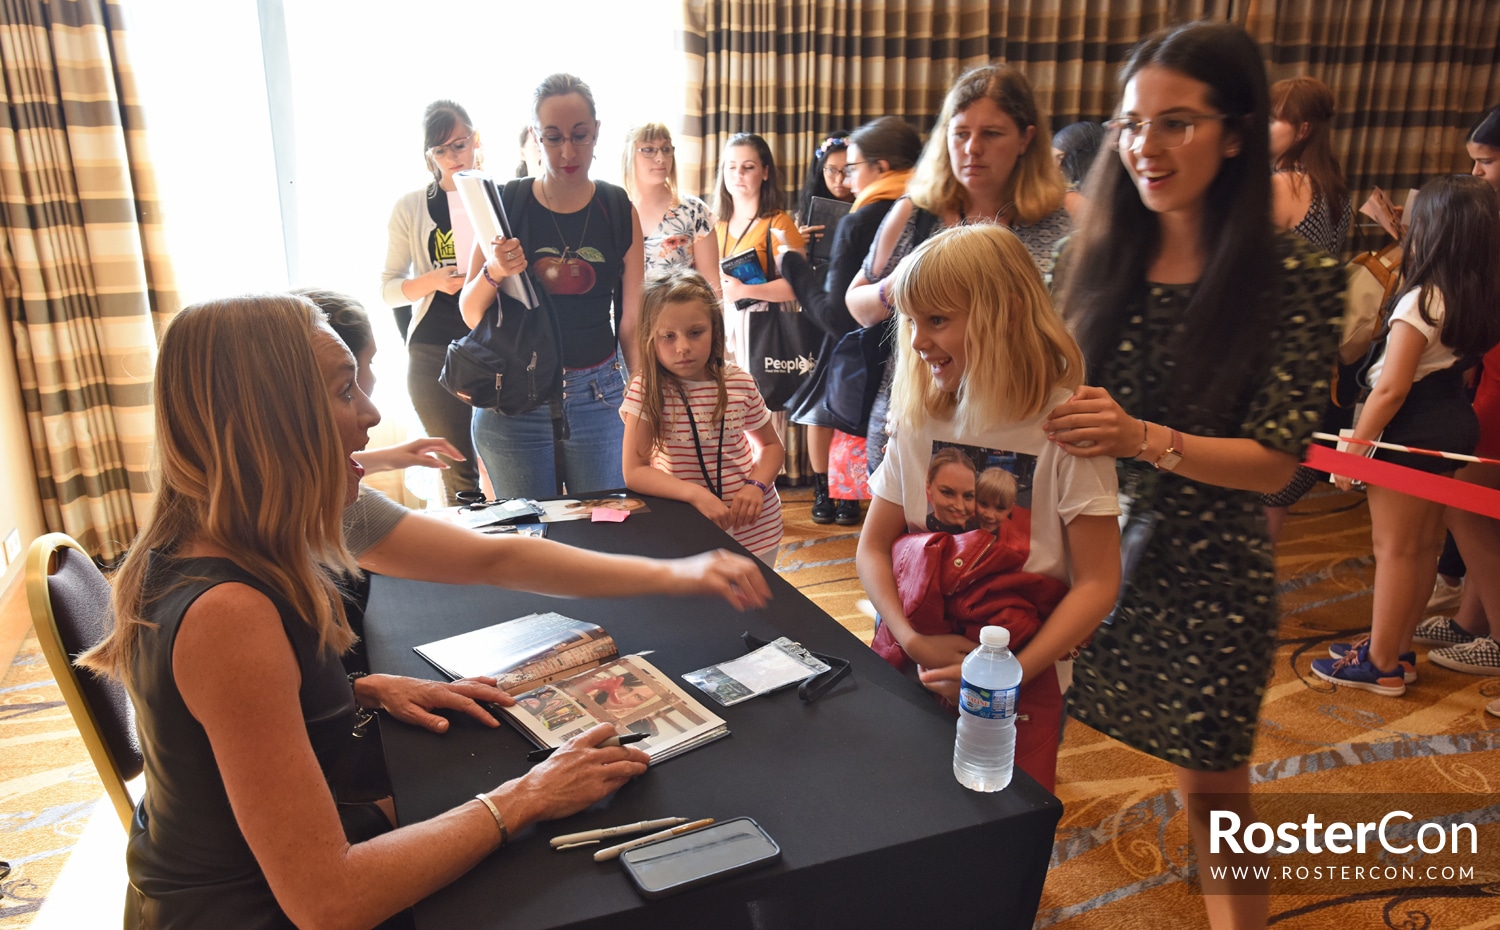 Victoria Smurfit - The Happy Ending Convention 3 - Once Upon A Time